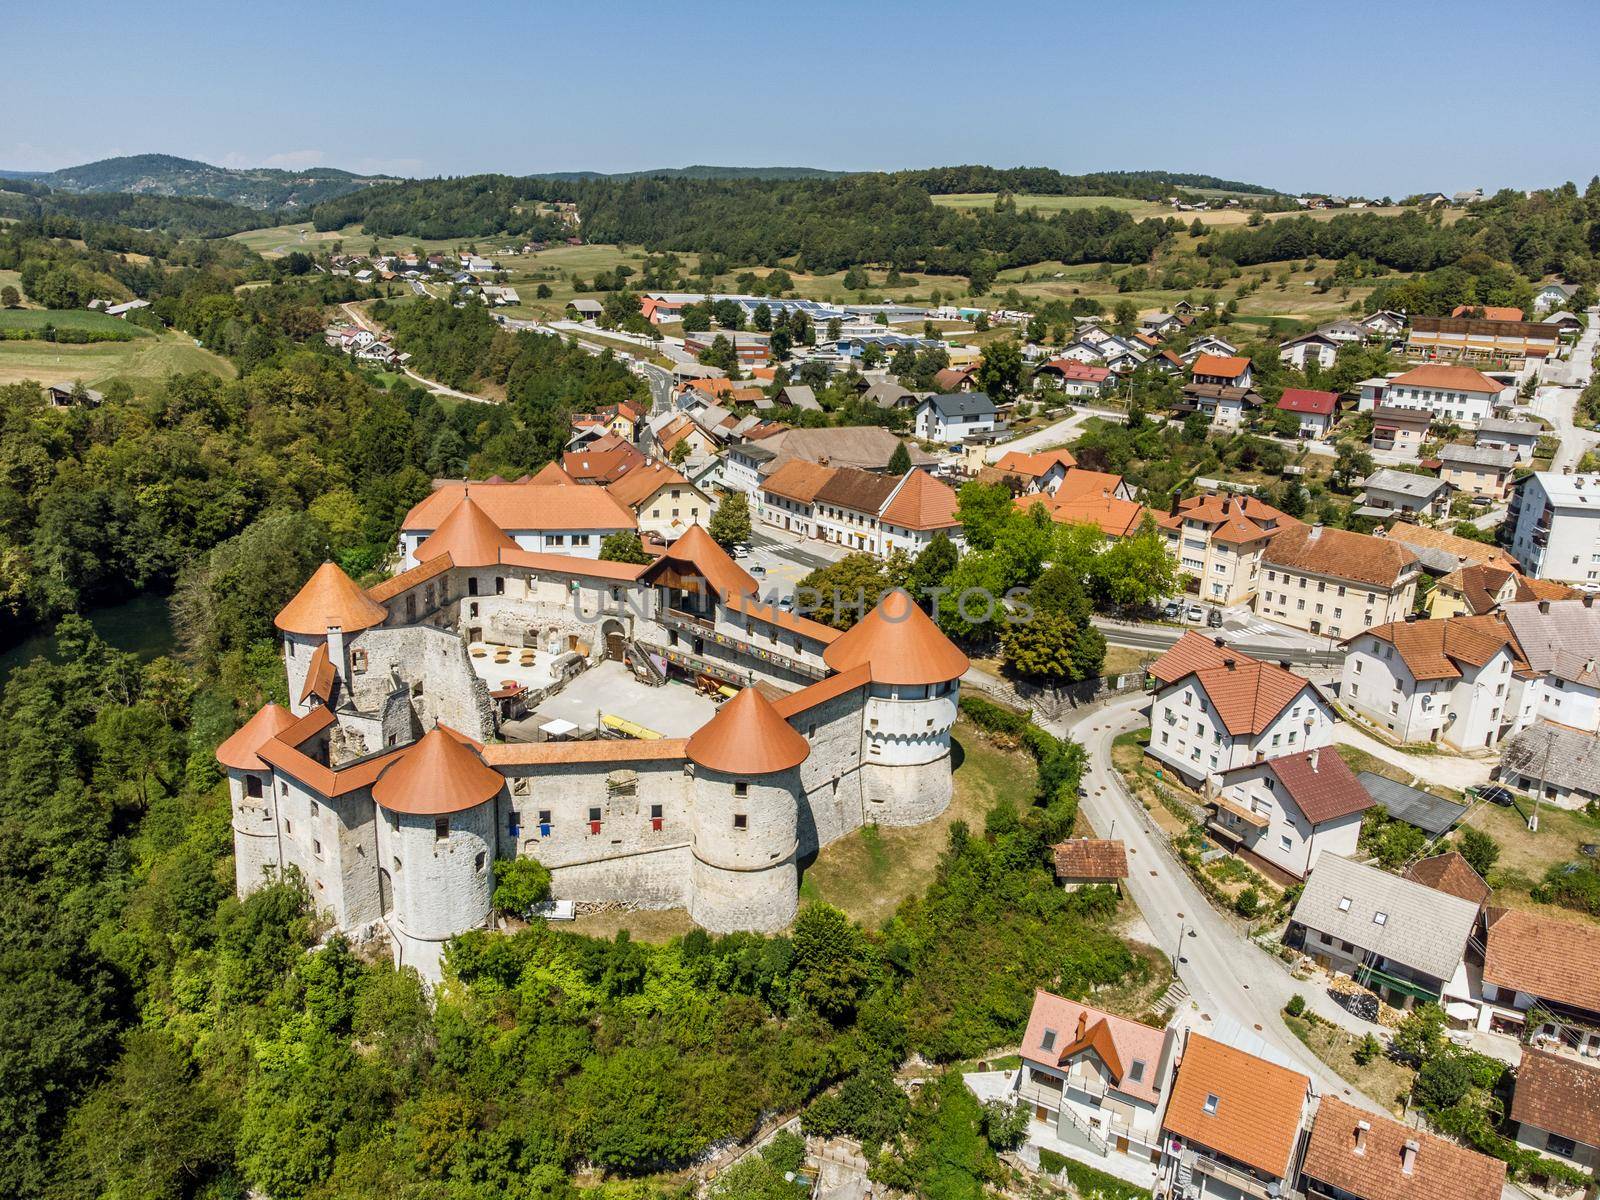 Aerial drone view of Medieval castle of Zuzemberk or Seisenburg or Sosenberch, positioned on terrace above the Krka River Canyon, Central Slovenia